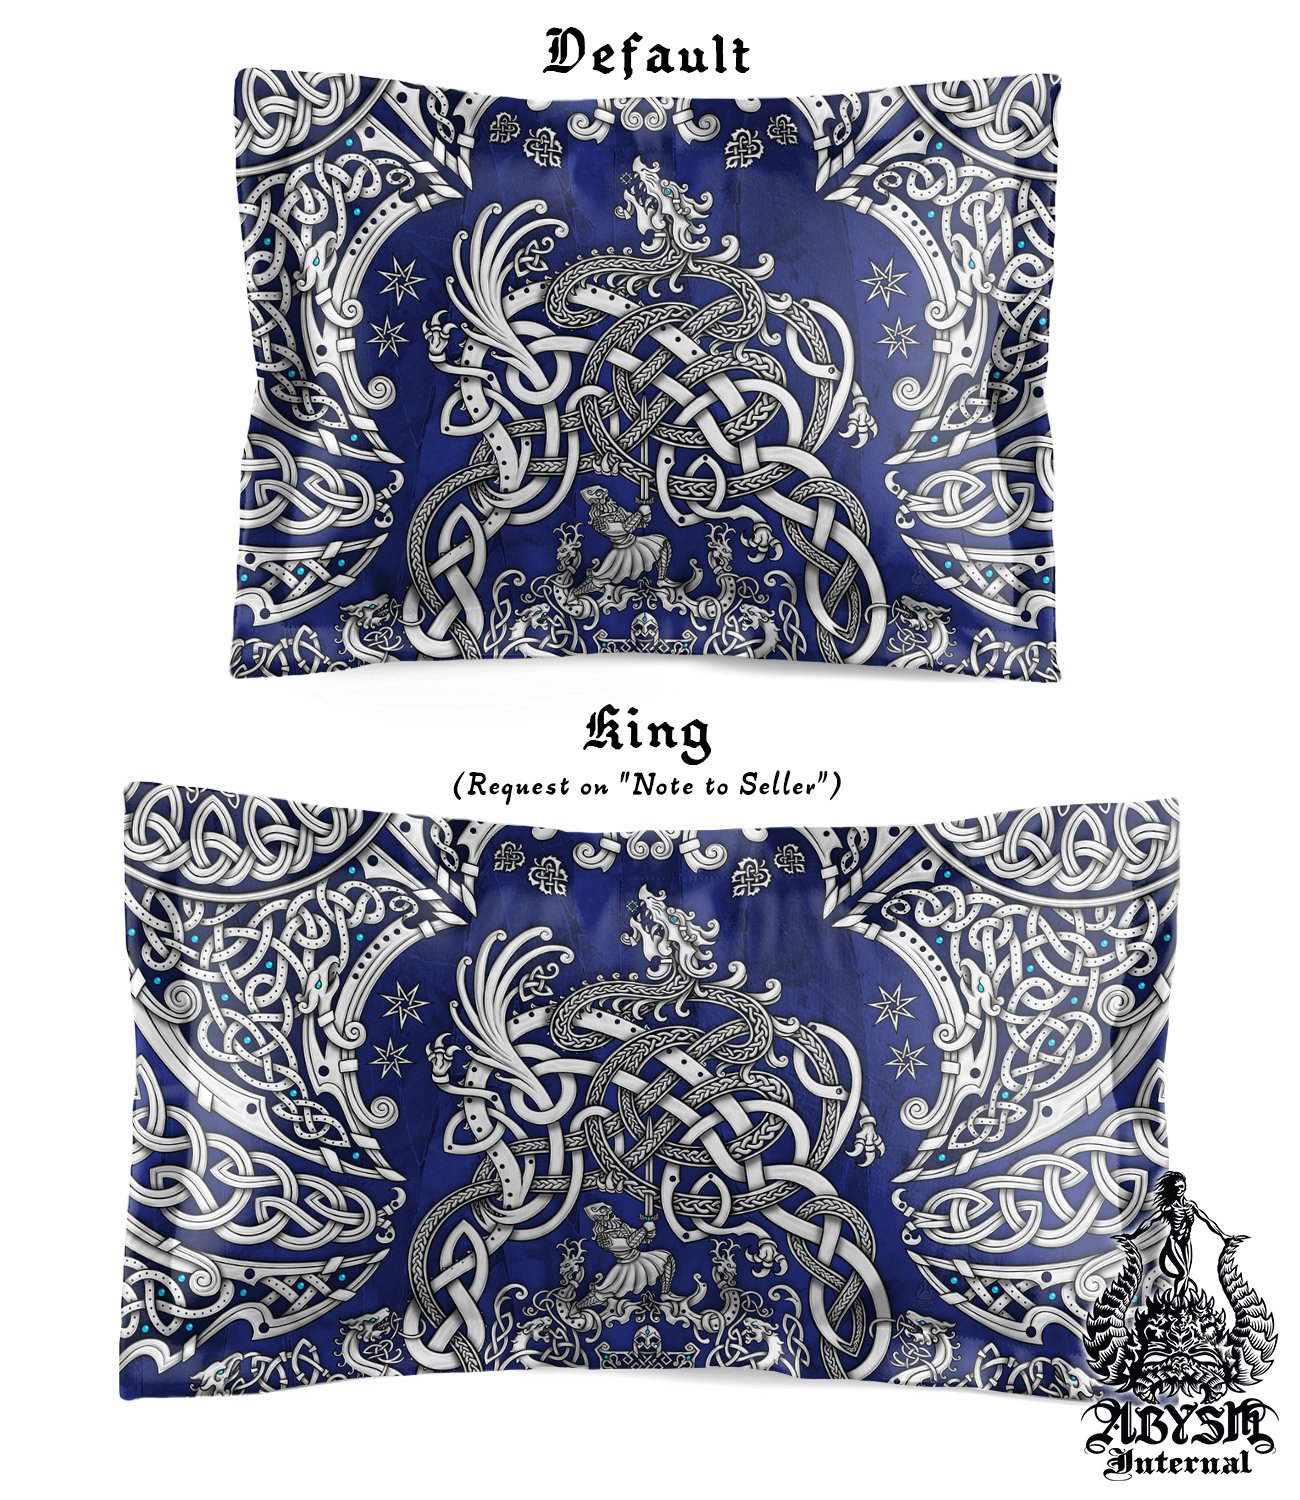 Viking Bedding Set, Comforter or Duvet, Nordic Bed Cover and Bedroom Decor, Sigurd kills Dragon Fafnir, King, Queen & Twin Size - White and 3 Colors: Red, Black, Blue - Abysm Internal